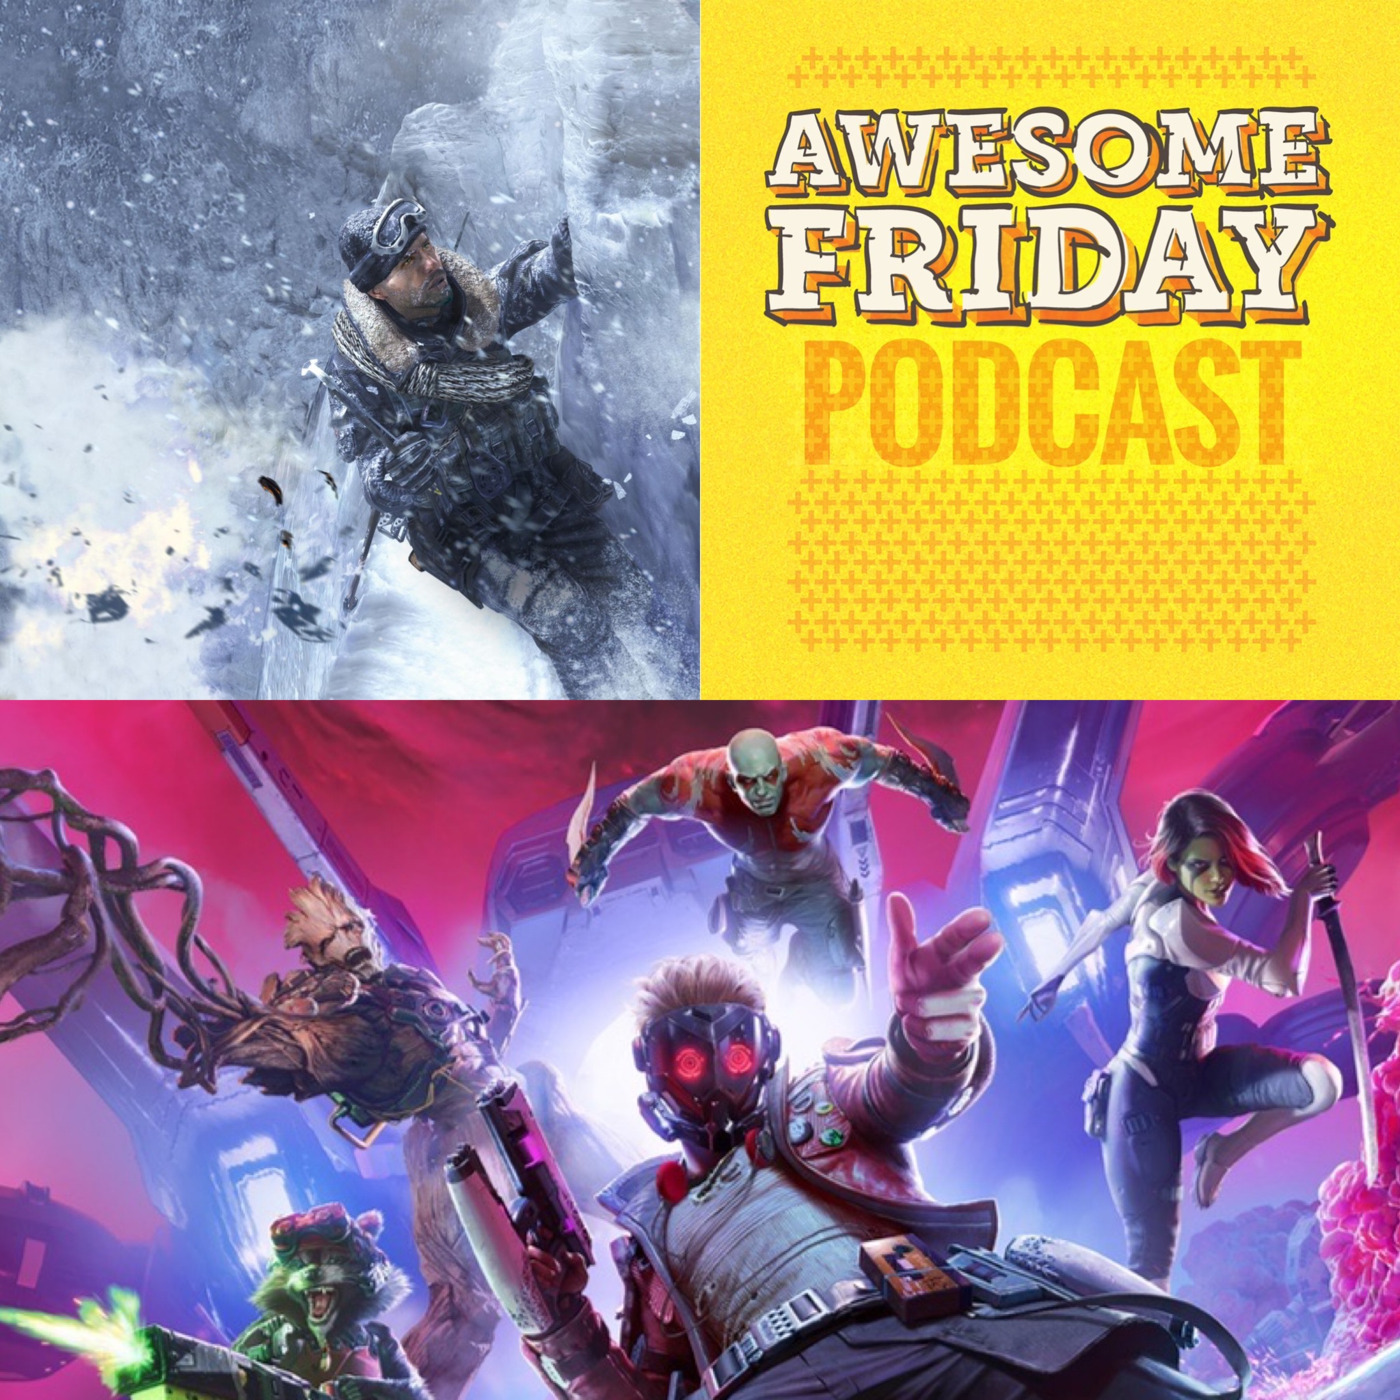 Episode 20: Games: Marvel's Guardians of the Galaxy & Call of Duty: Modern Warfare 2